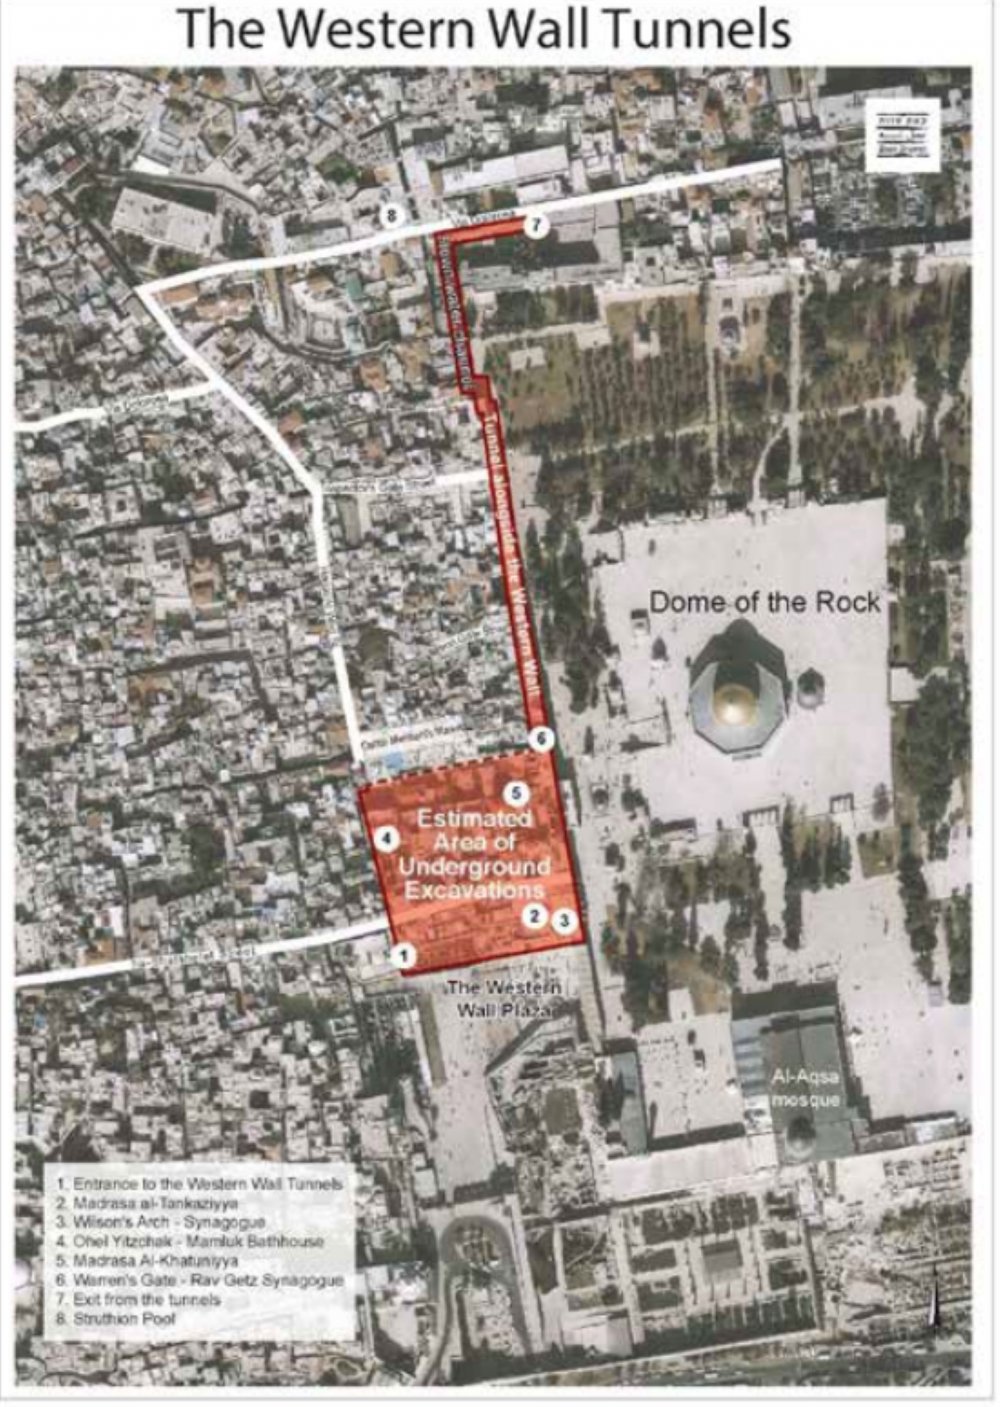 Map of Israel’s Western Wall tunnels: the excavation area and the overground parts affected, including the Haram al-Sharif